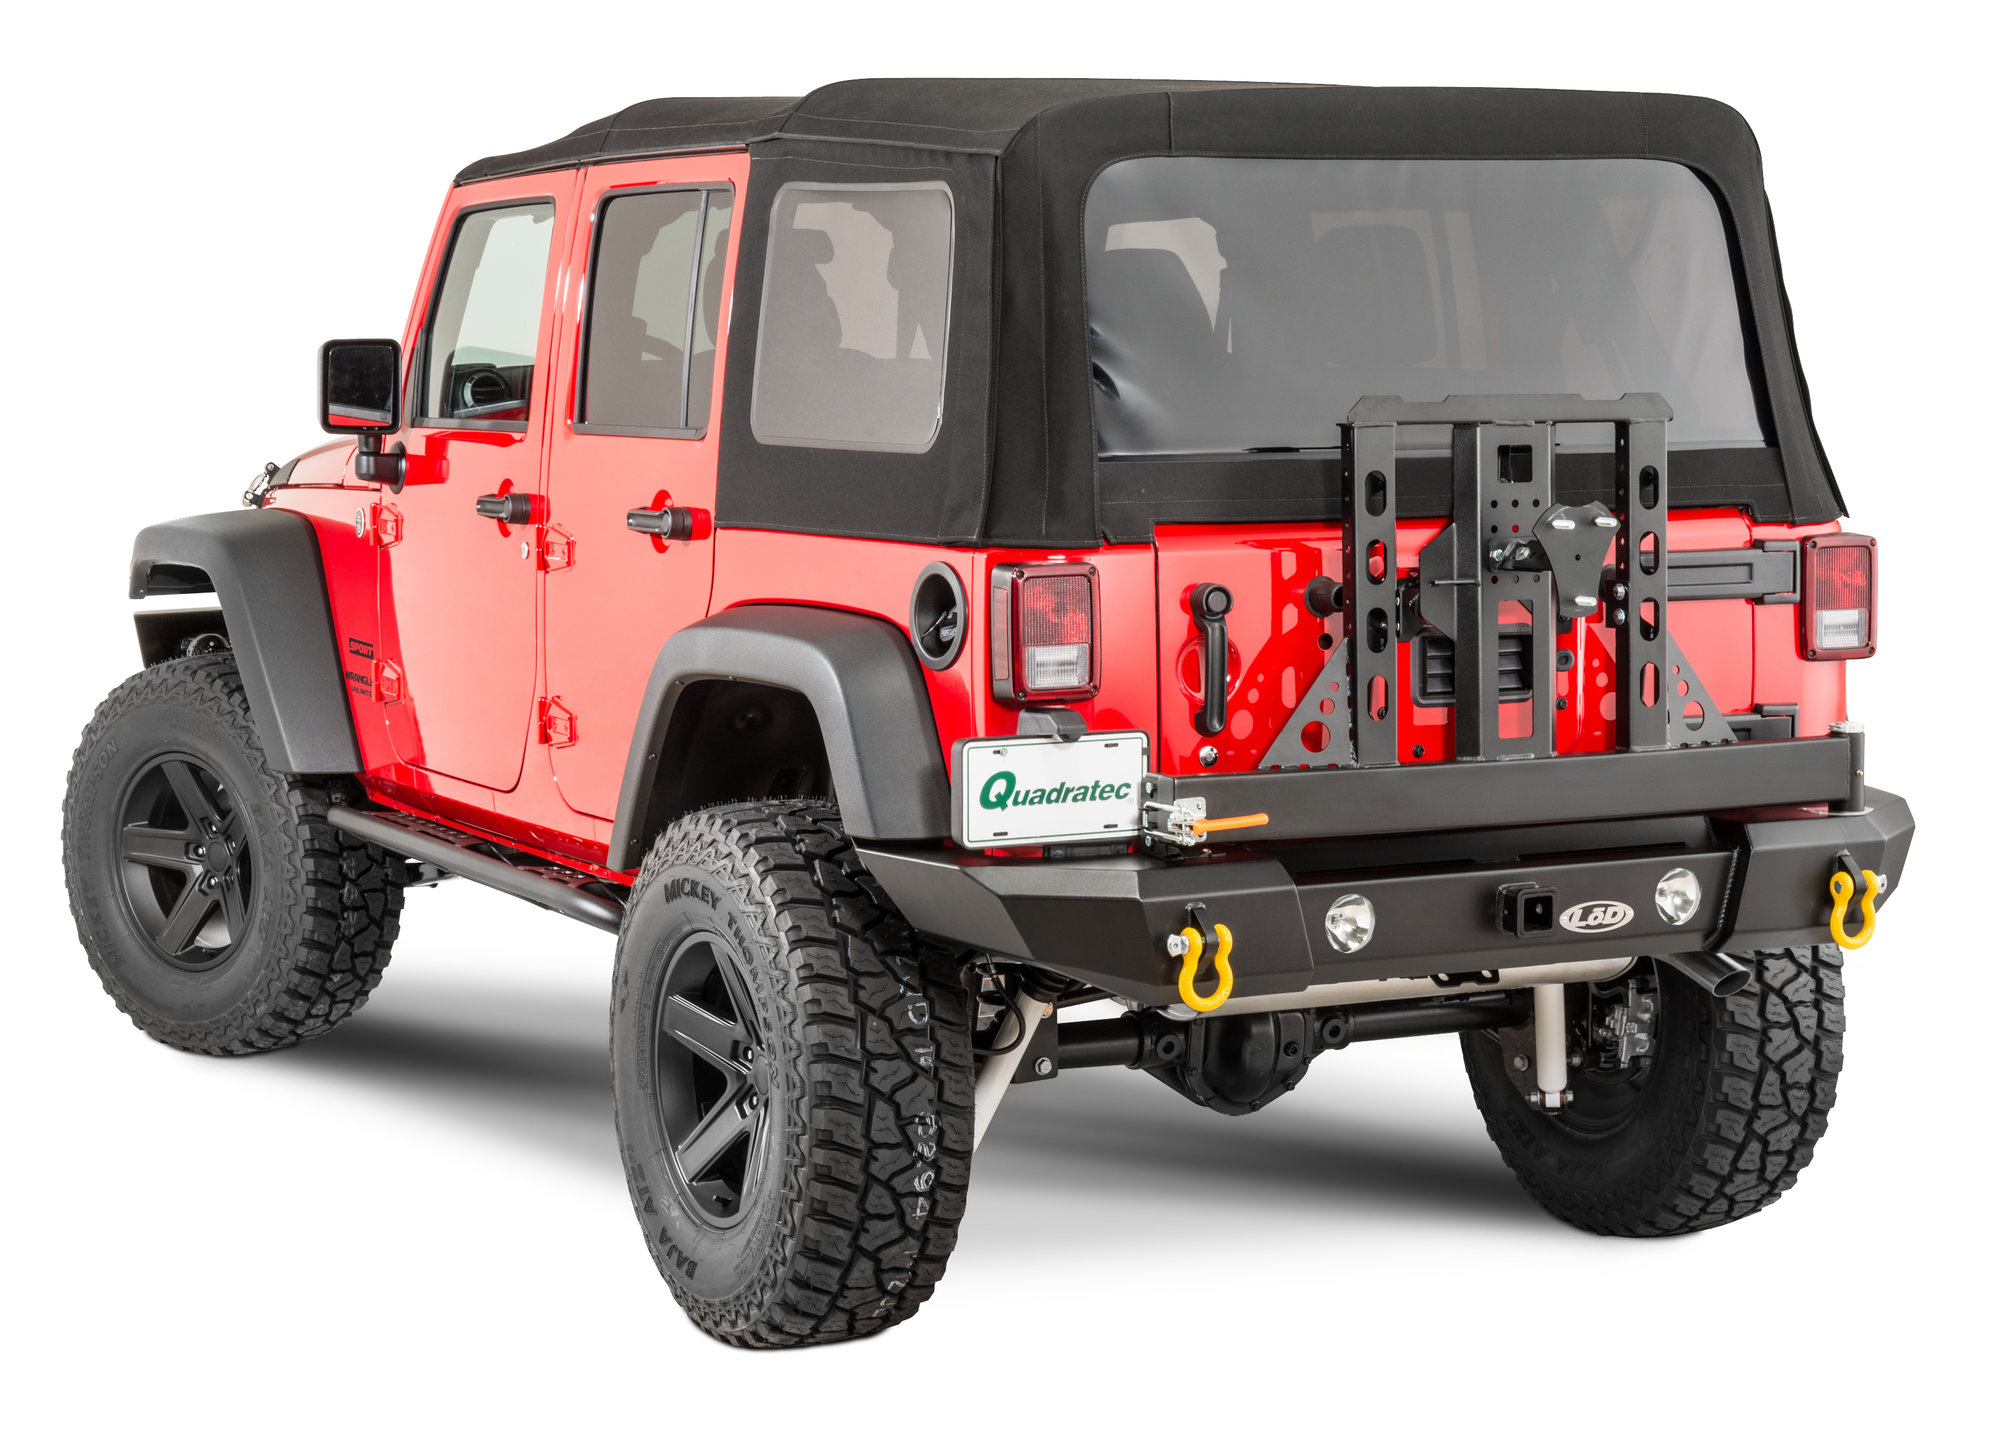 LoD Standard Signature Series Full Width Rear Bumper and Tire Carrier for 07-18  Jeep Wrangler and Wrangler Unlimited JK | Quadratec